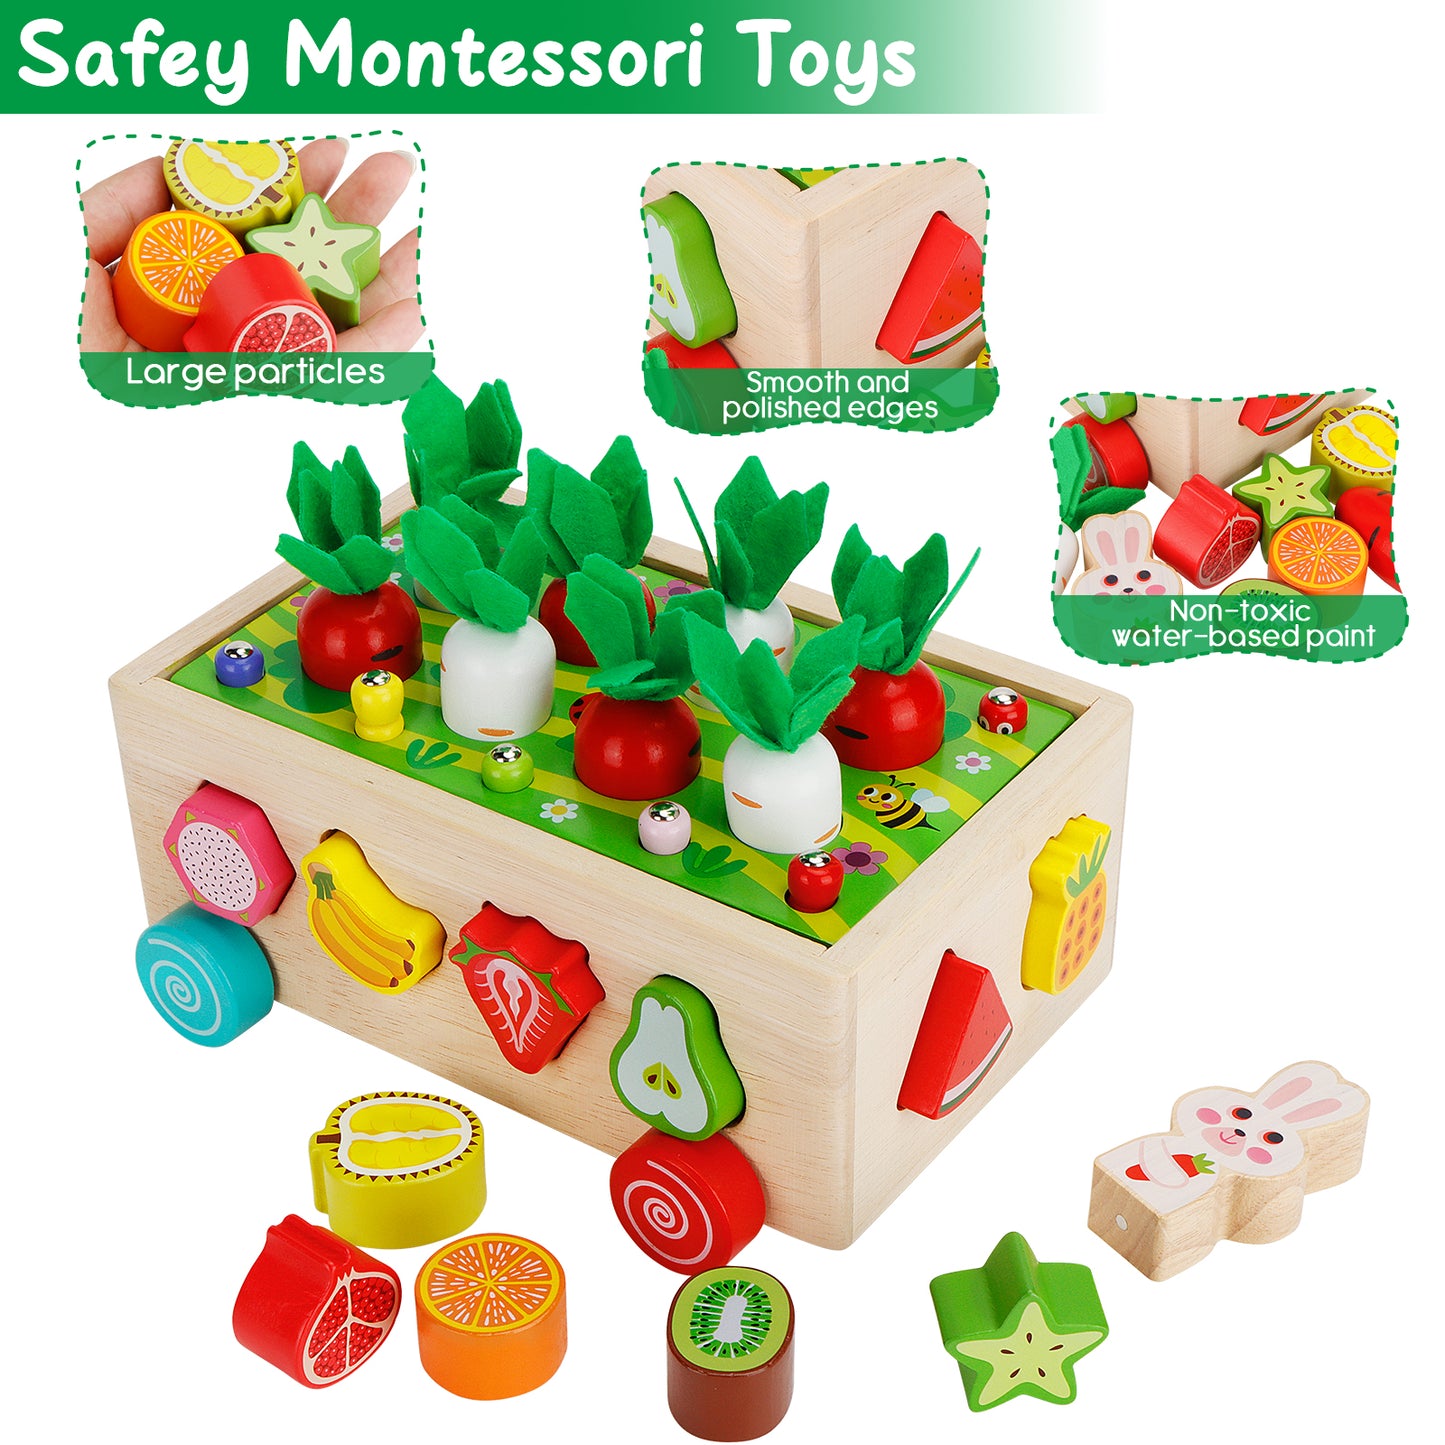 DRAMATION Montessori Wooden Garden Toy for Baby Boys Girls 3 4 Years Old, Fine Motor Skills Developmental Gift Toy Color Shape Fruit Sorting Orchard Cart Farm Game for Toddler 36+ Months